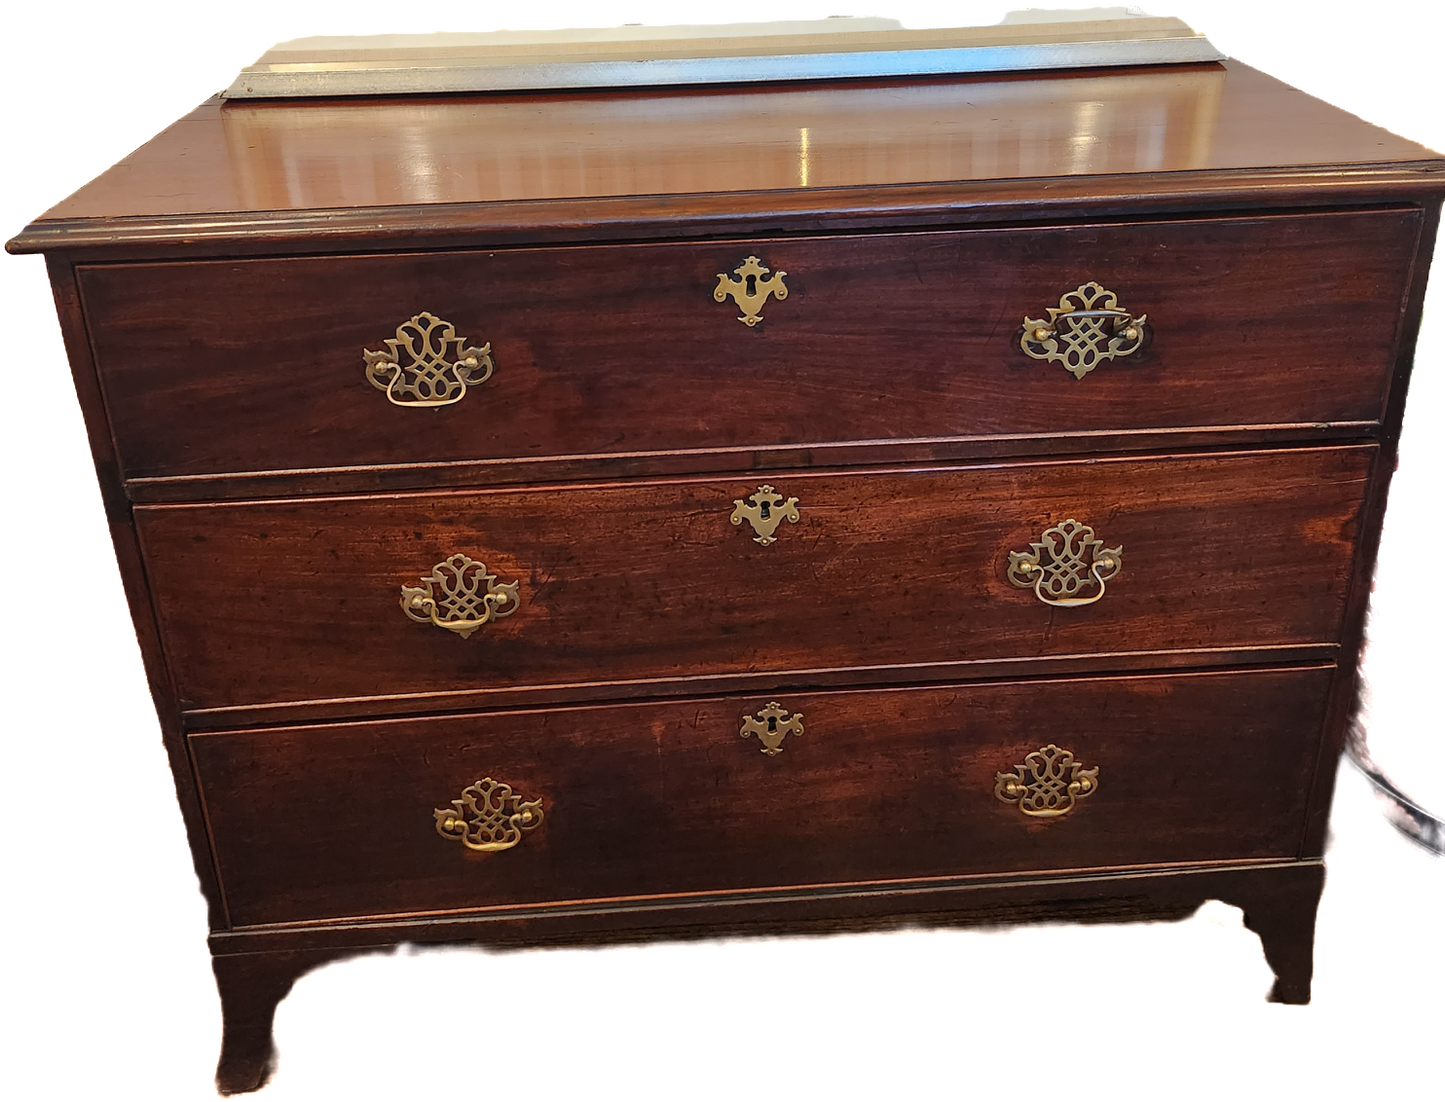 Antique Mahogany Drop Front Secretaire Chest of drawers with brass hardware